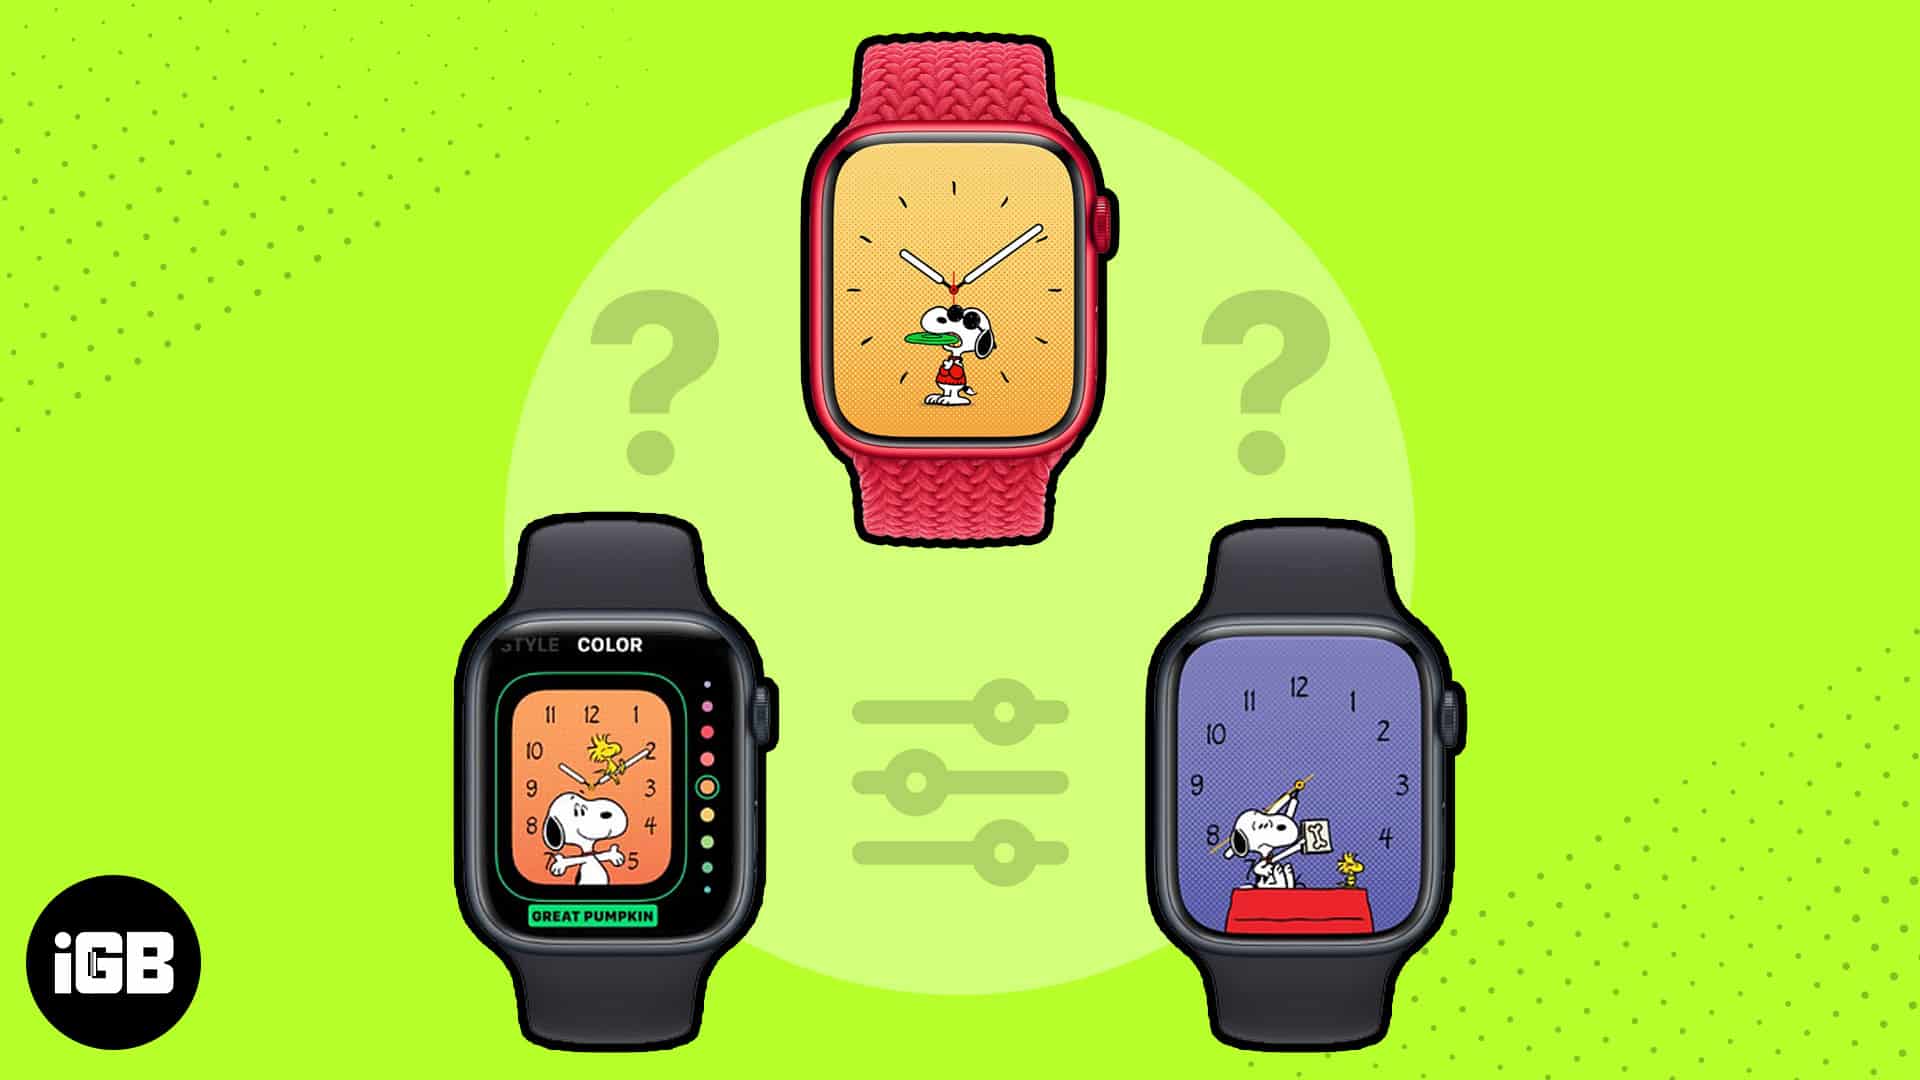 How to add and customize Snoopy watch face on your Apple Watch